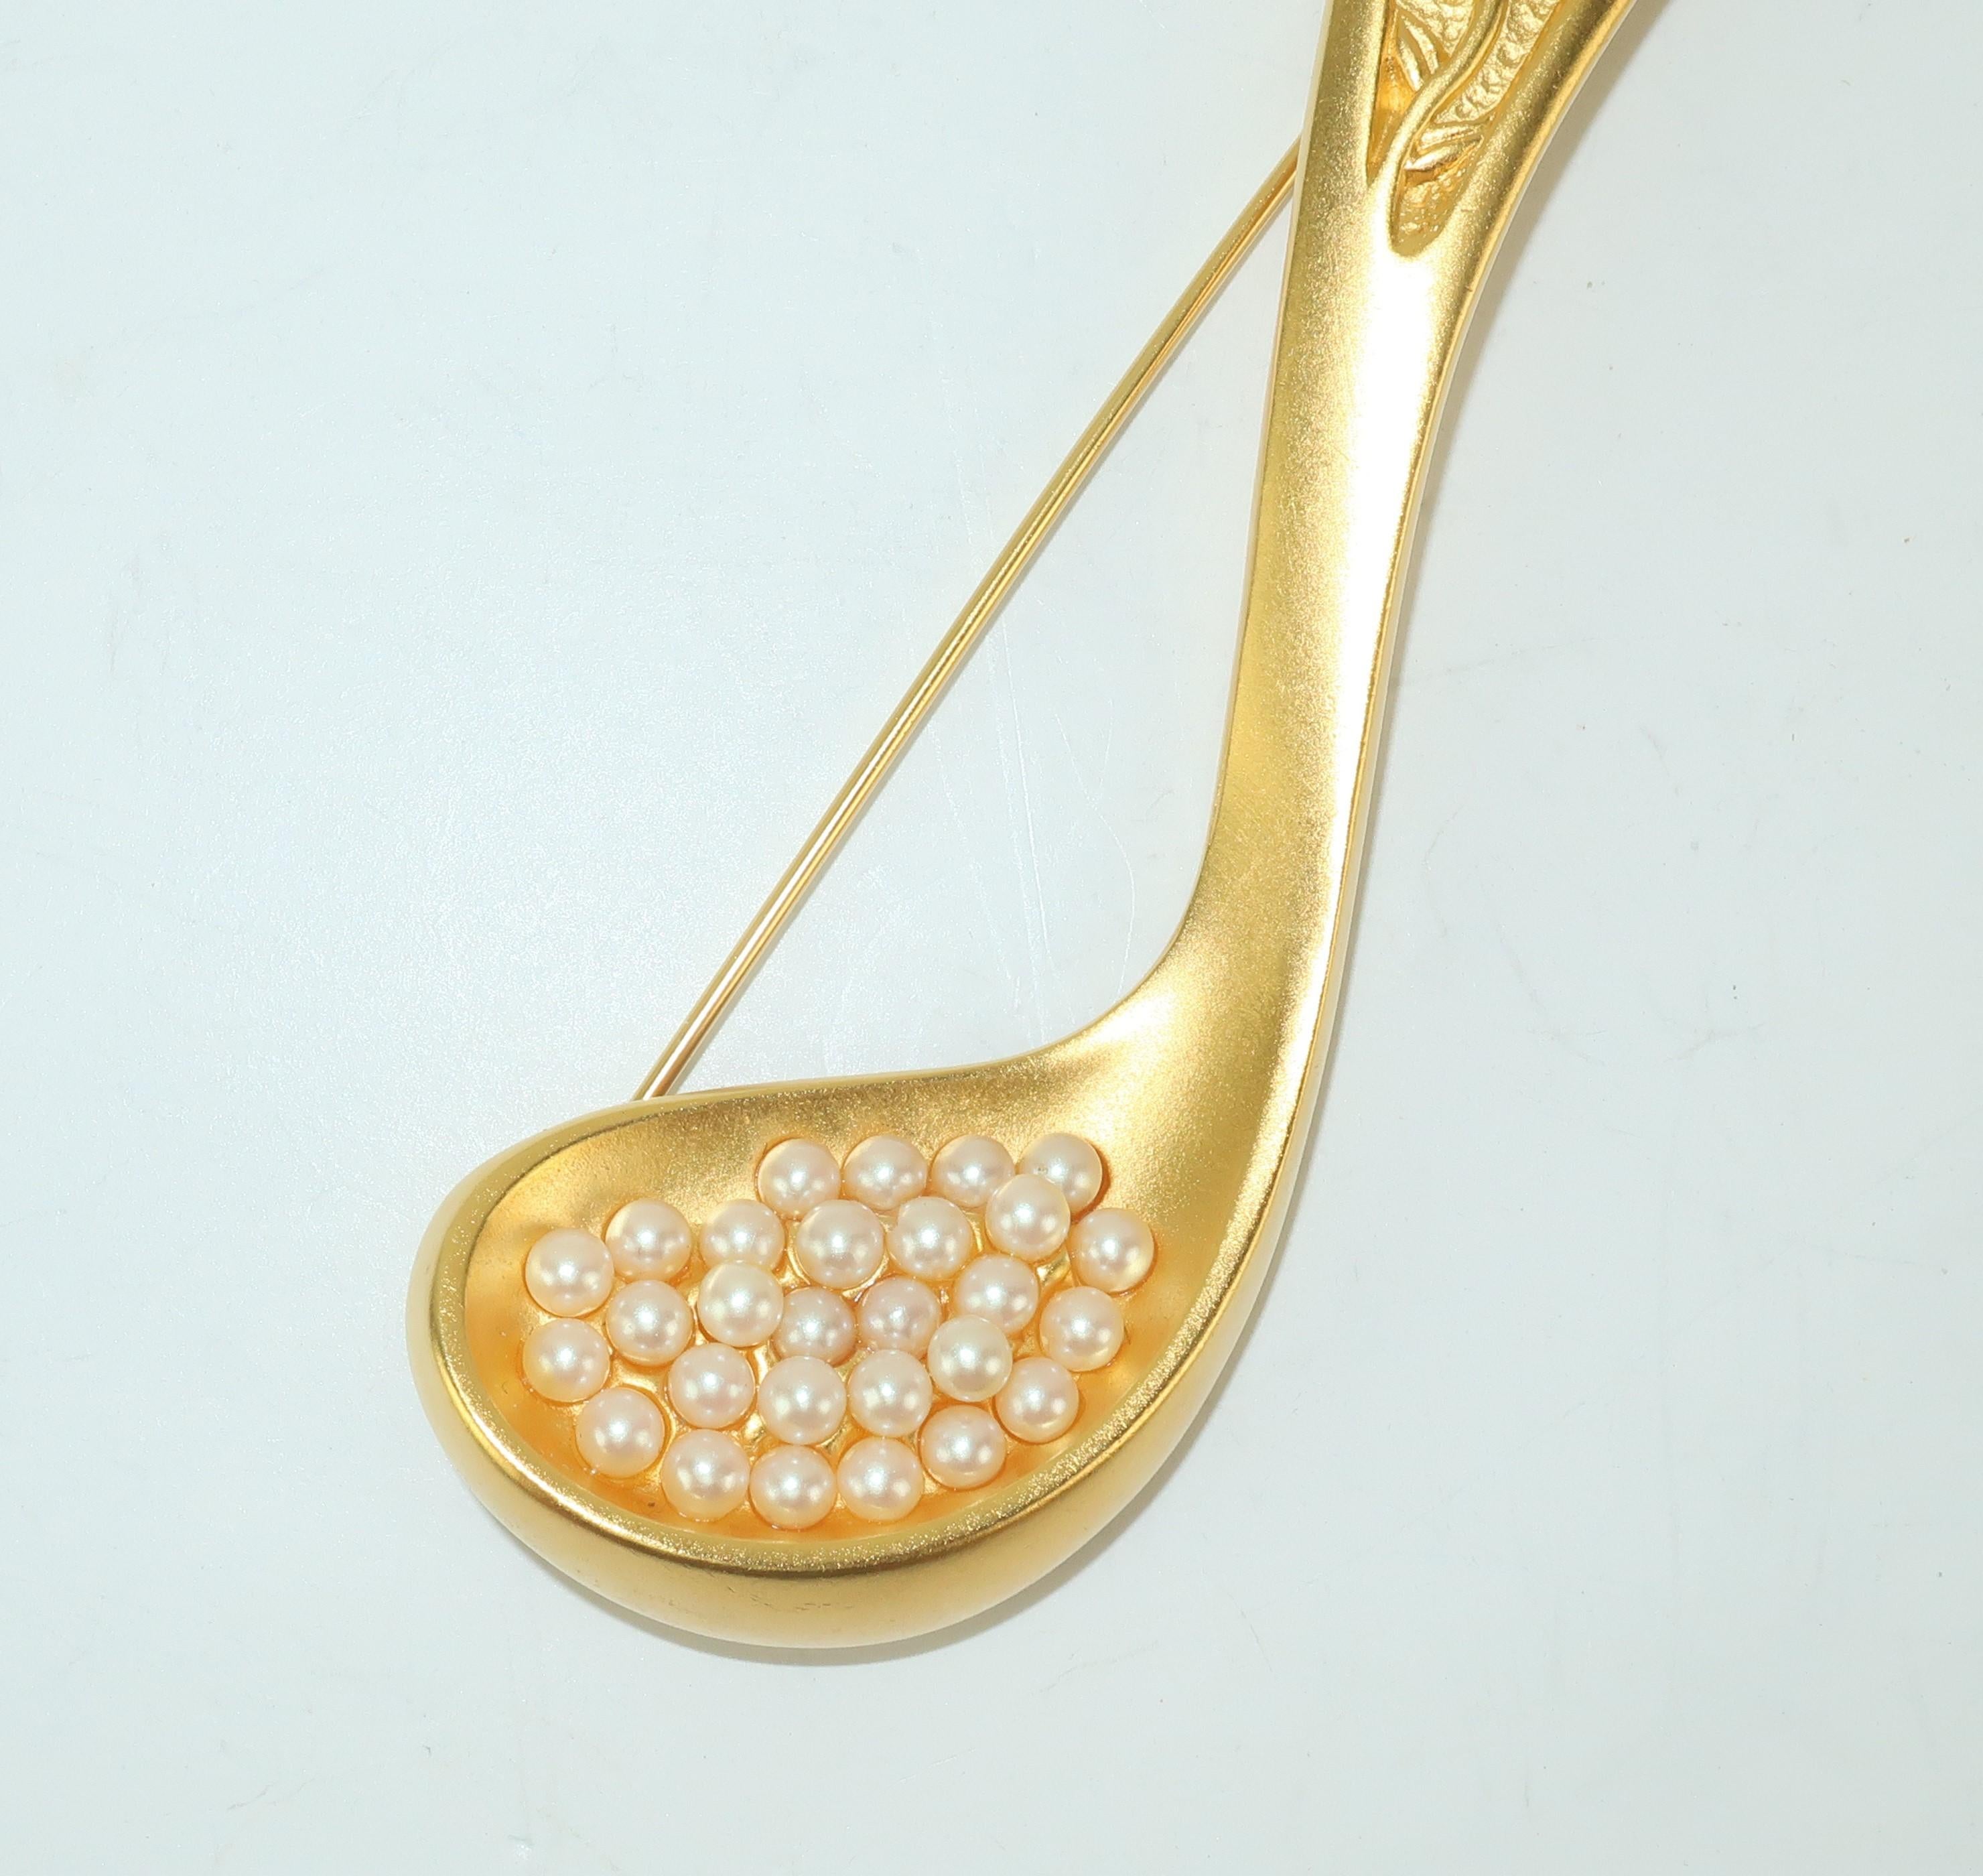 Large Karl Lagerfeld Gilt Gold Fork & Spoon Brooch With Pearls 2